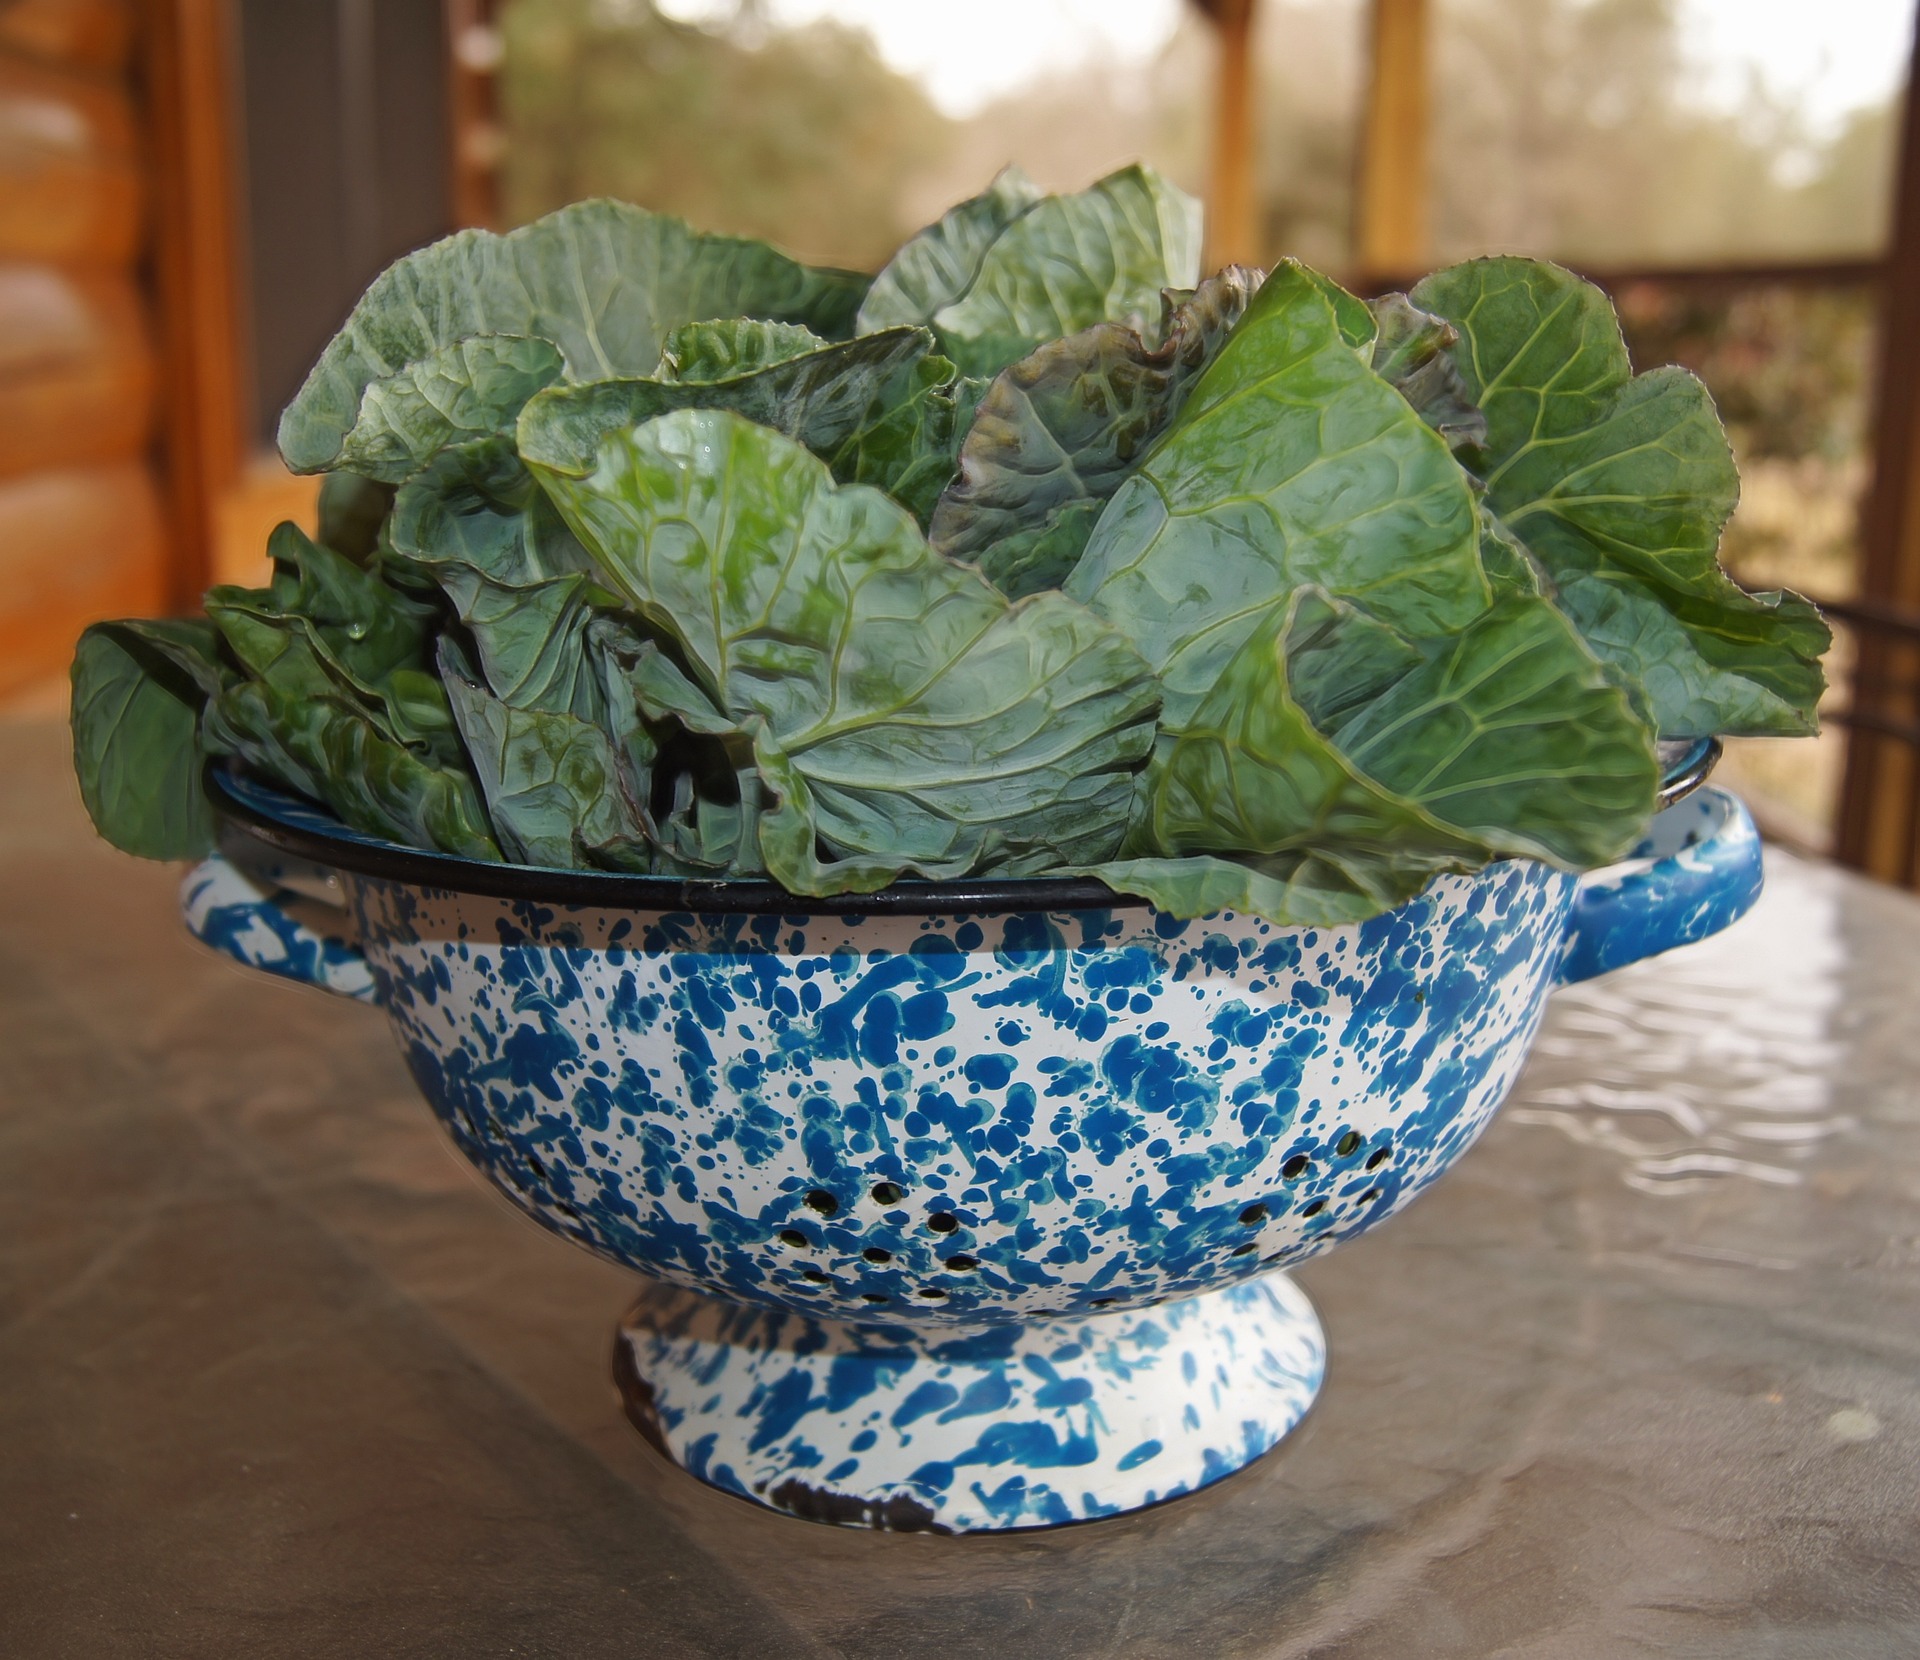 collard greens harvested in a white and blue bowl